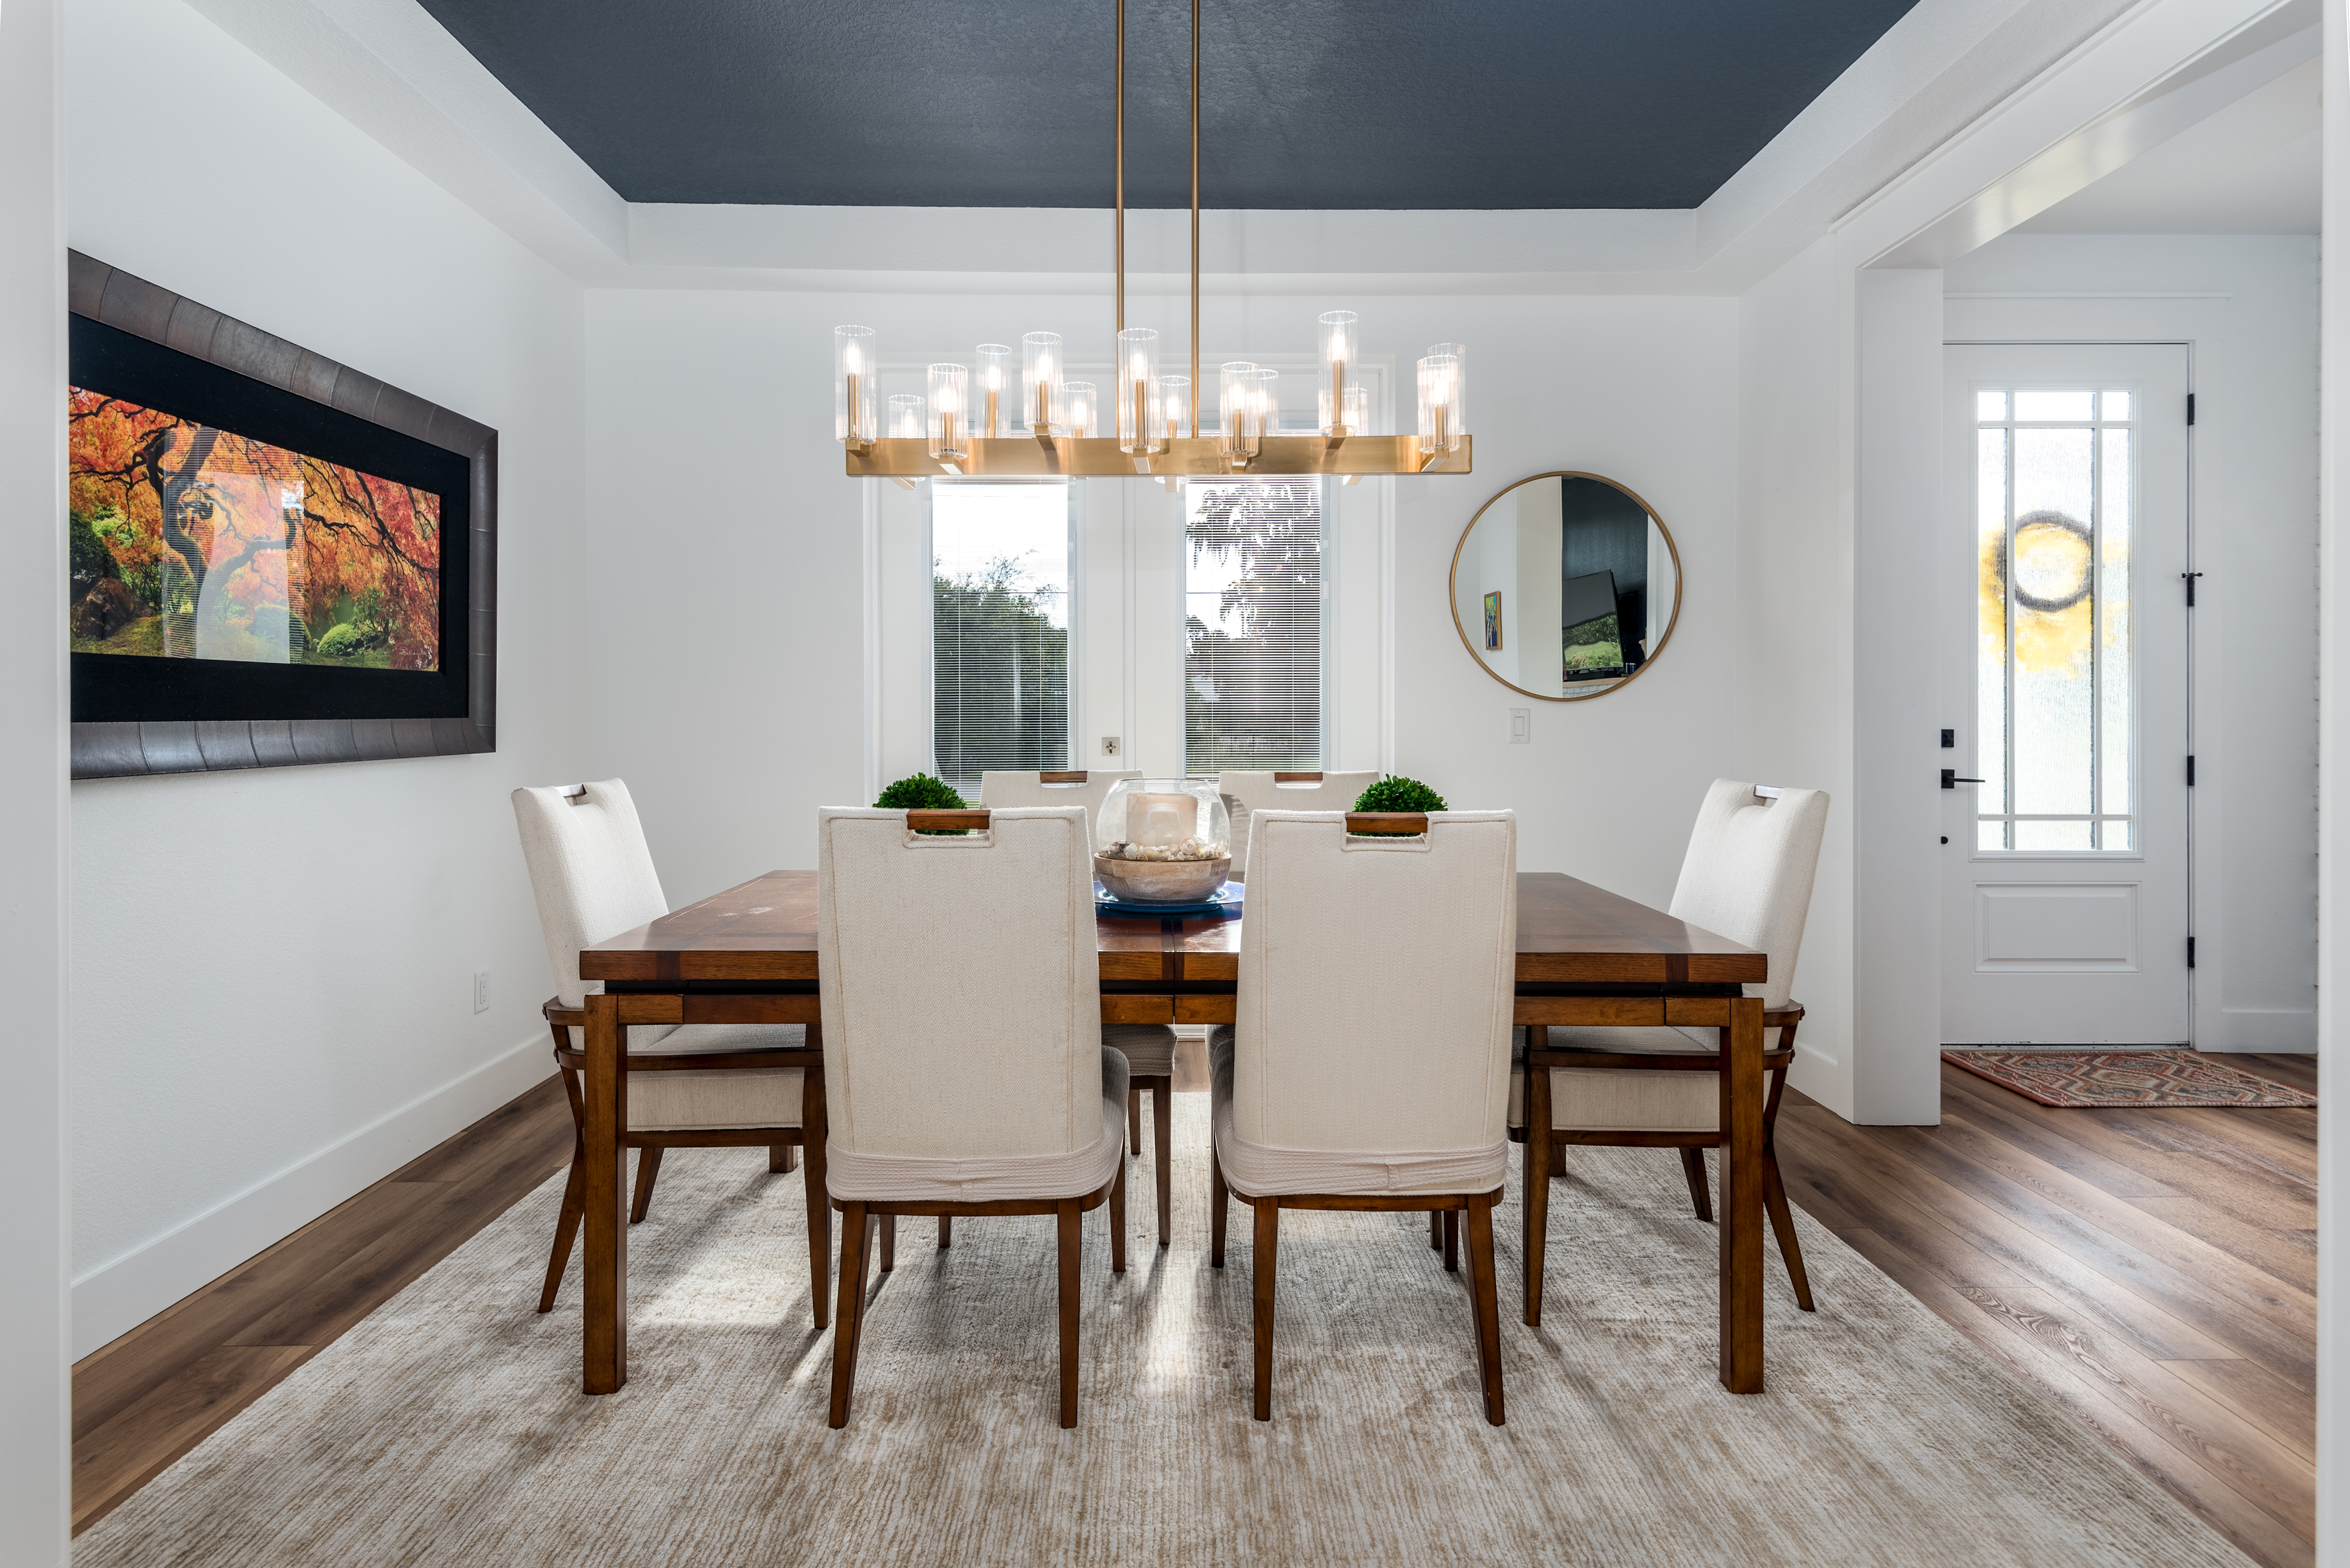 <span  class="uc_style_uc_tiles_grid_image_elementor_uc_items_attribute_title" style="color:#ffffff;">Dining Room 2 - High Res</span>